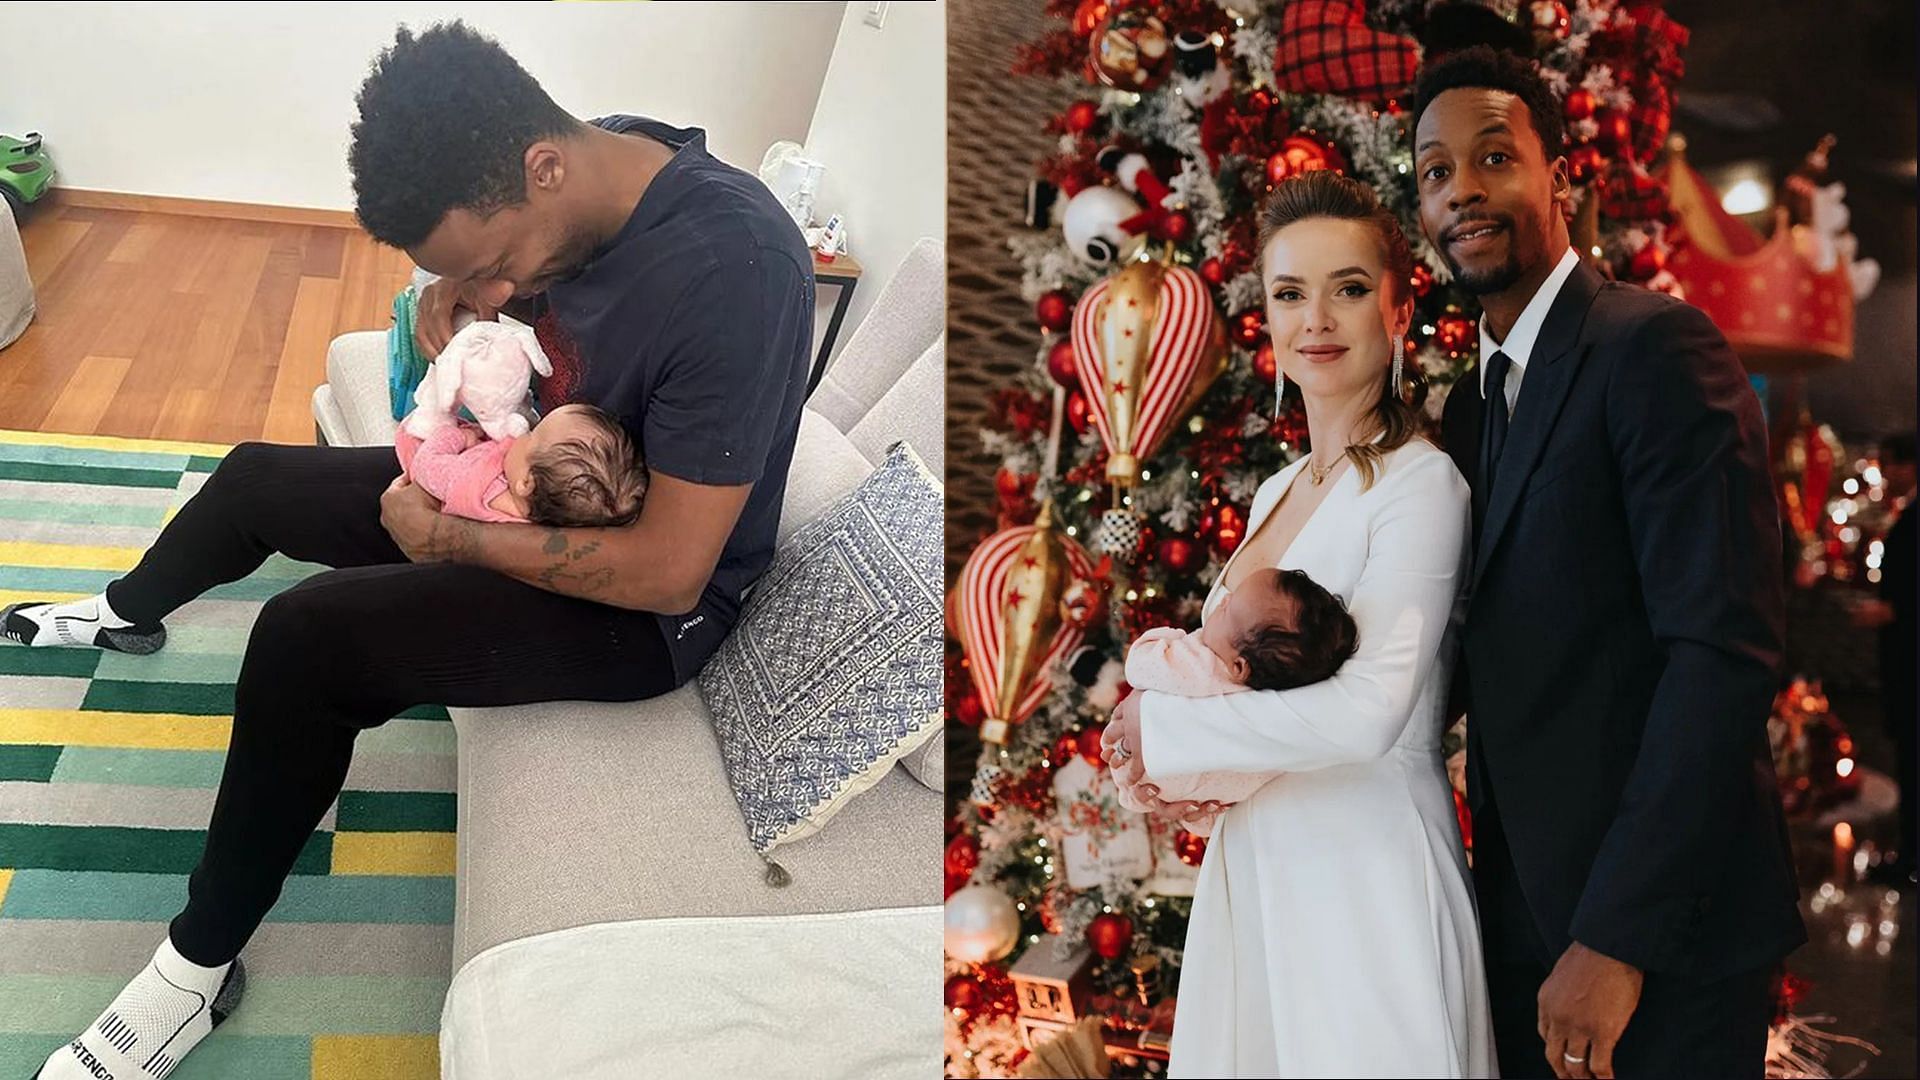 Elina Svitolina and Gael Monfils with their daughter Skai Monfils